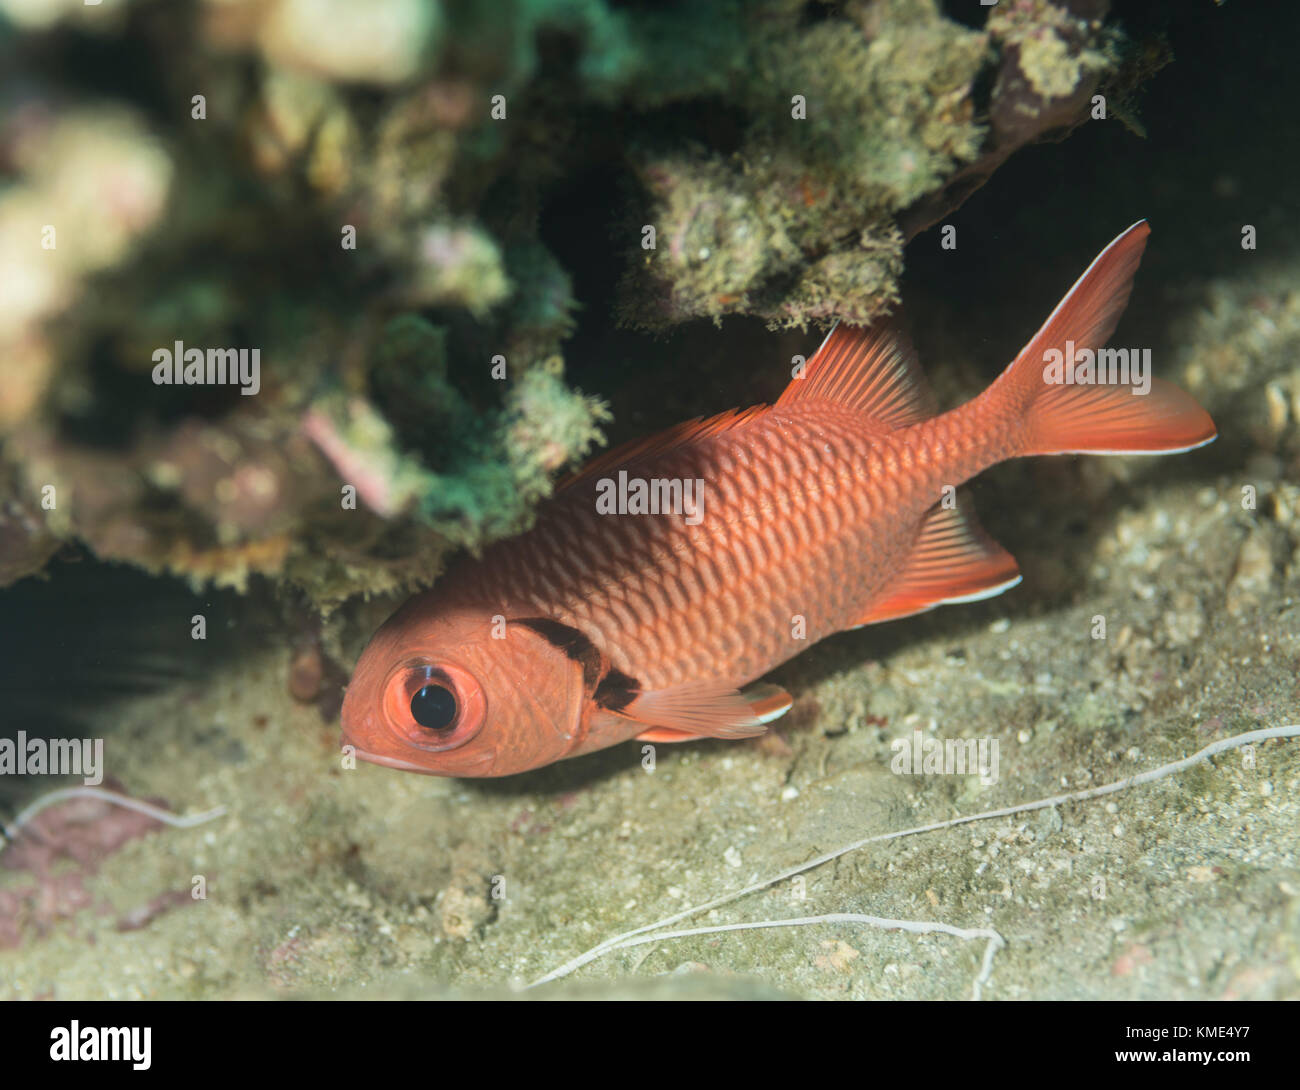 Big-eyed scarlet soldierfish hiding under a coral Stock Photo